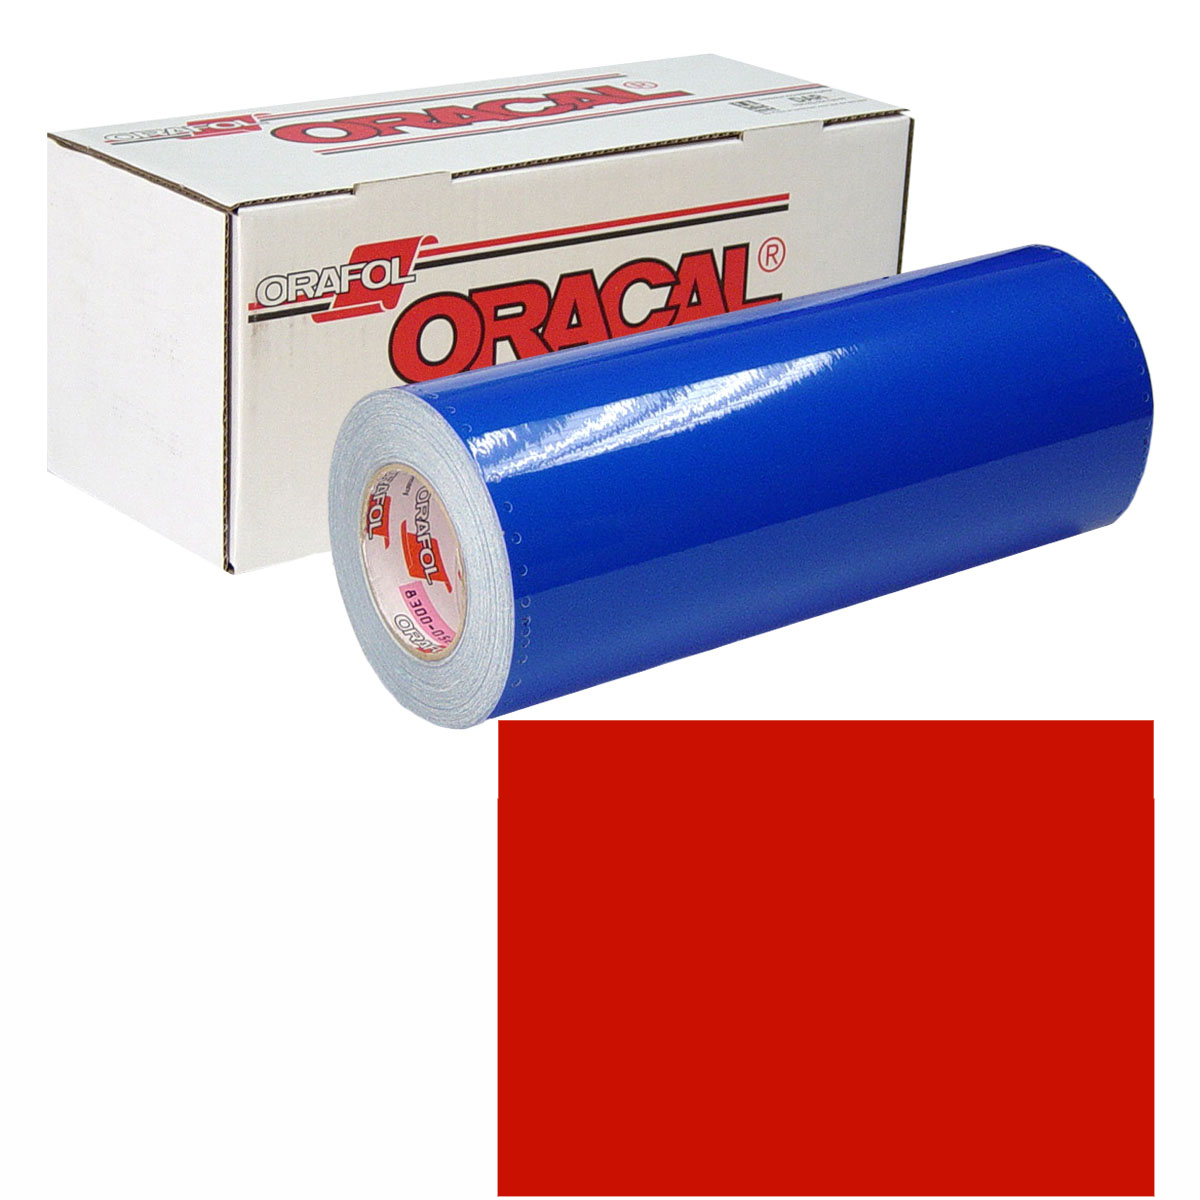 ORACAL 631 15in X 50yd 032 Light Red